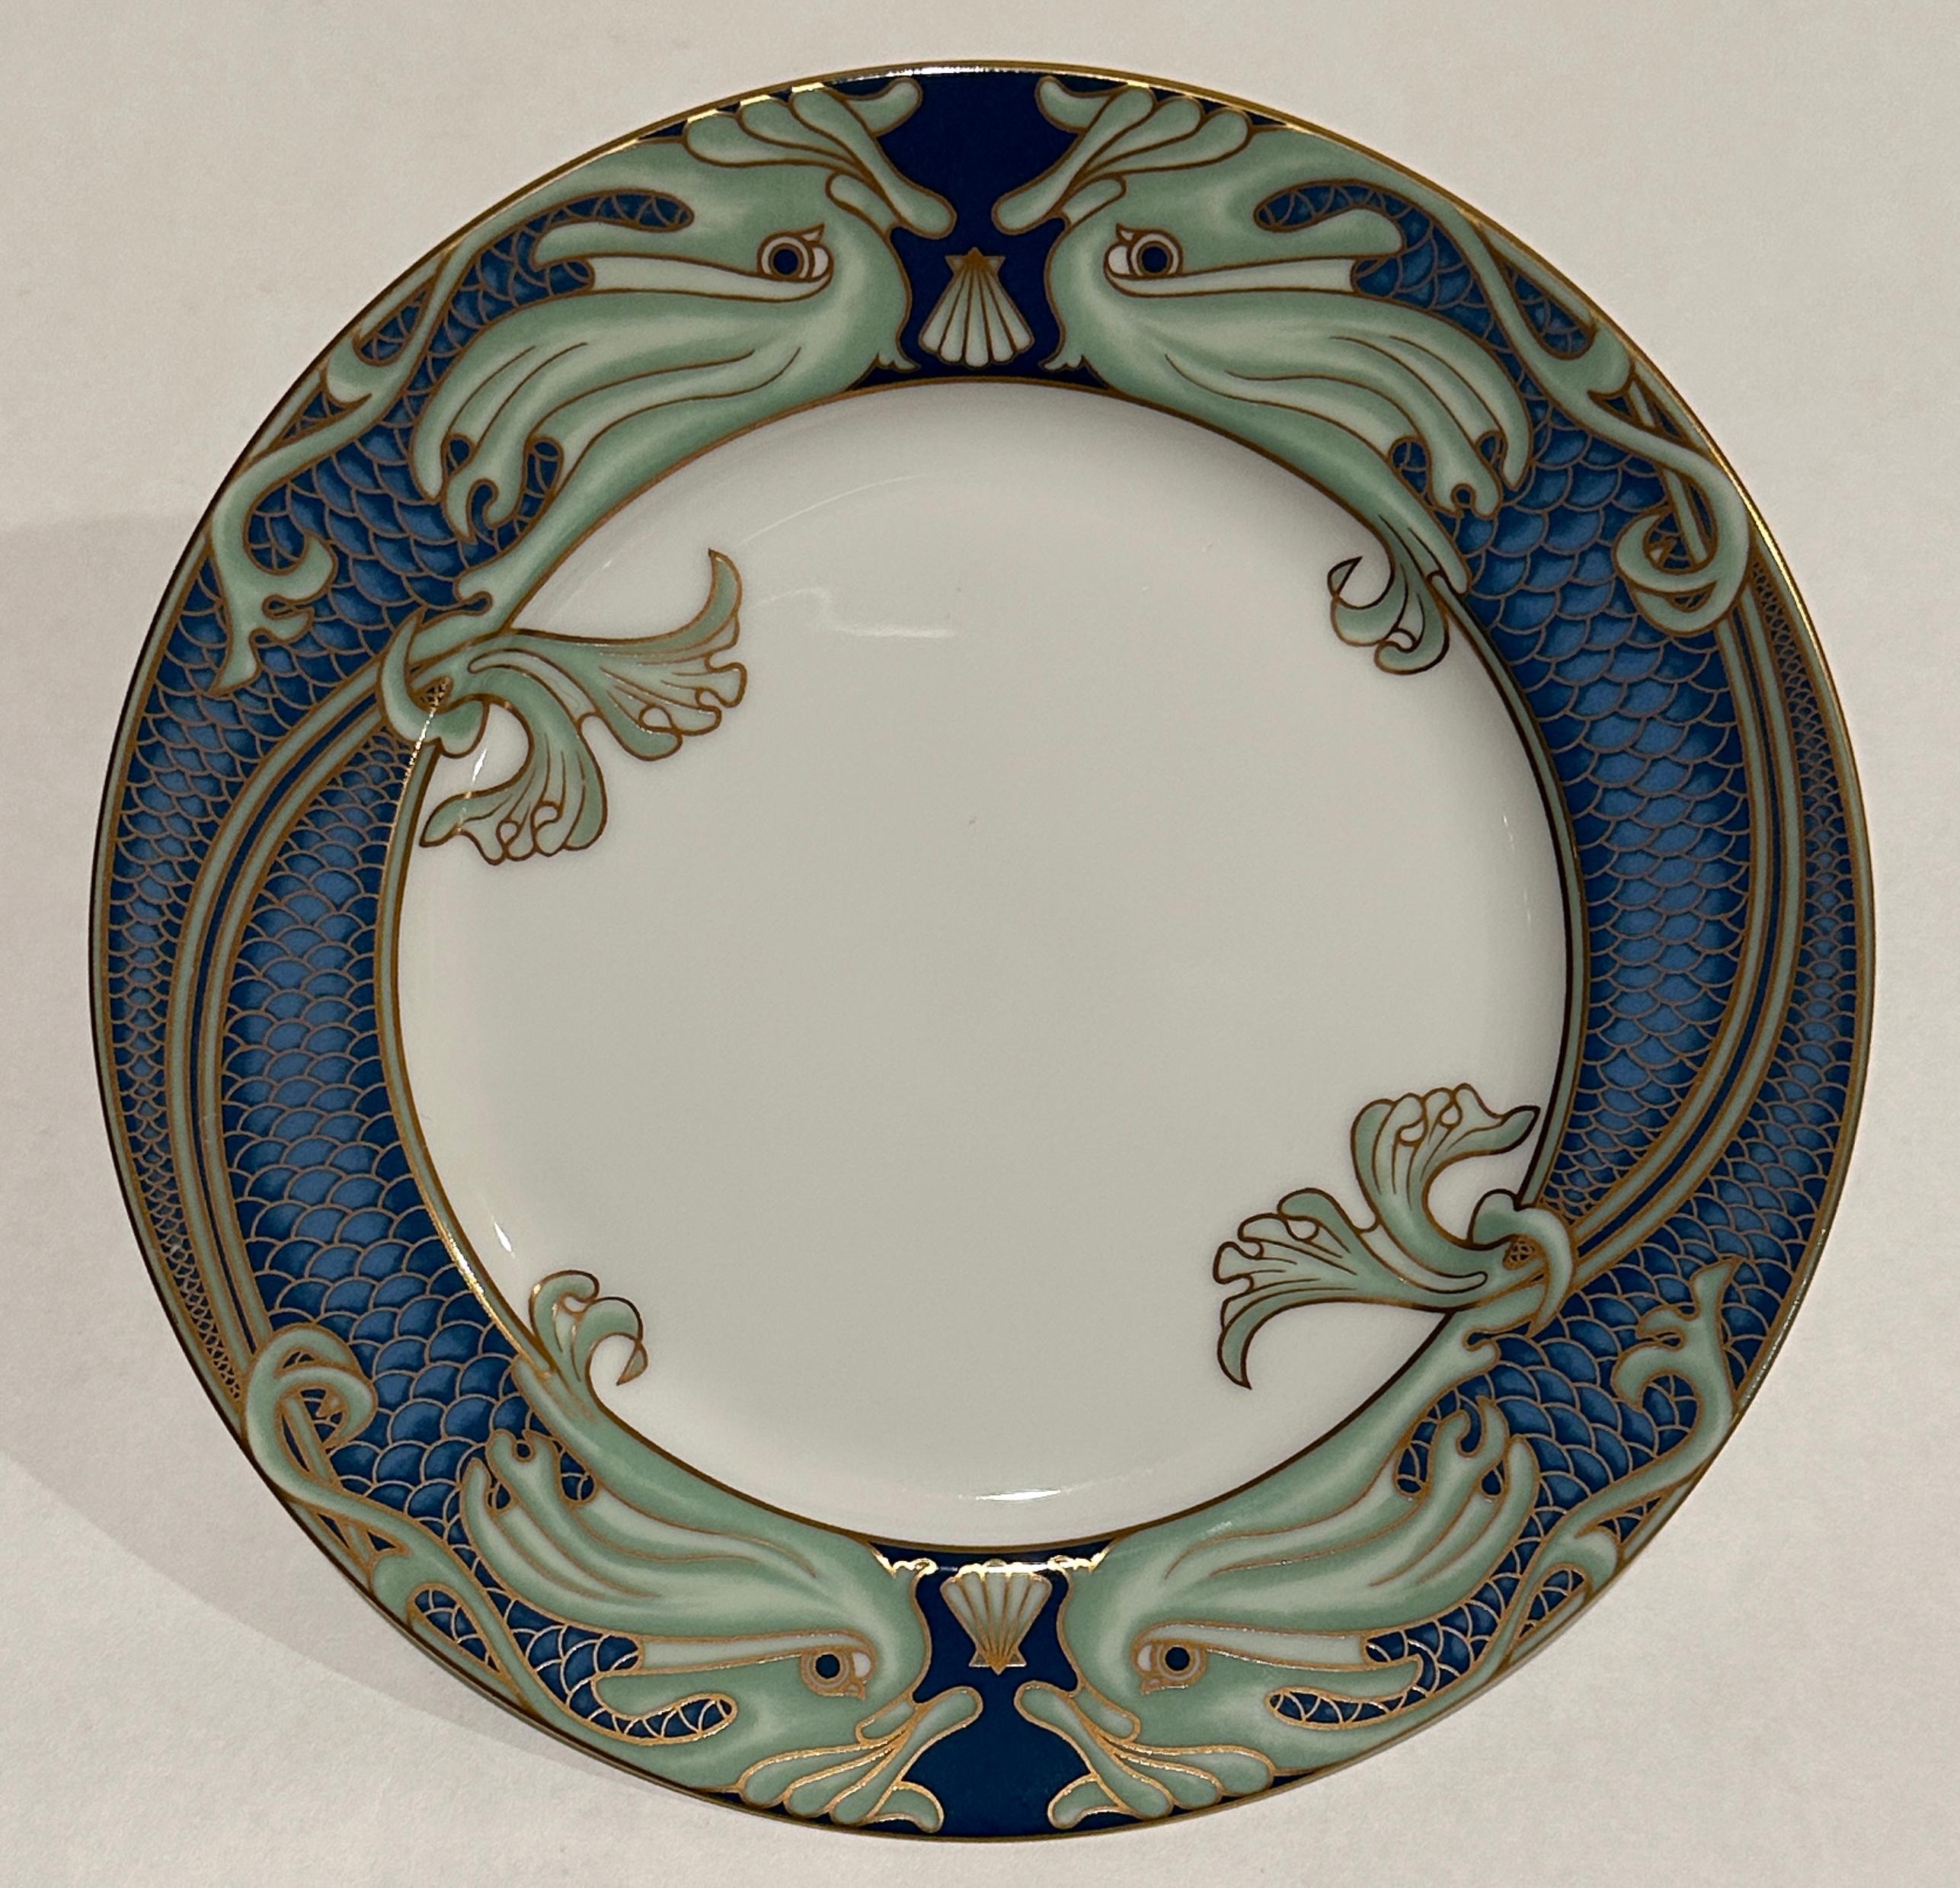 Blue and green with gilt accents, Fitz & Floyd 